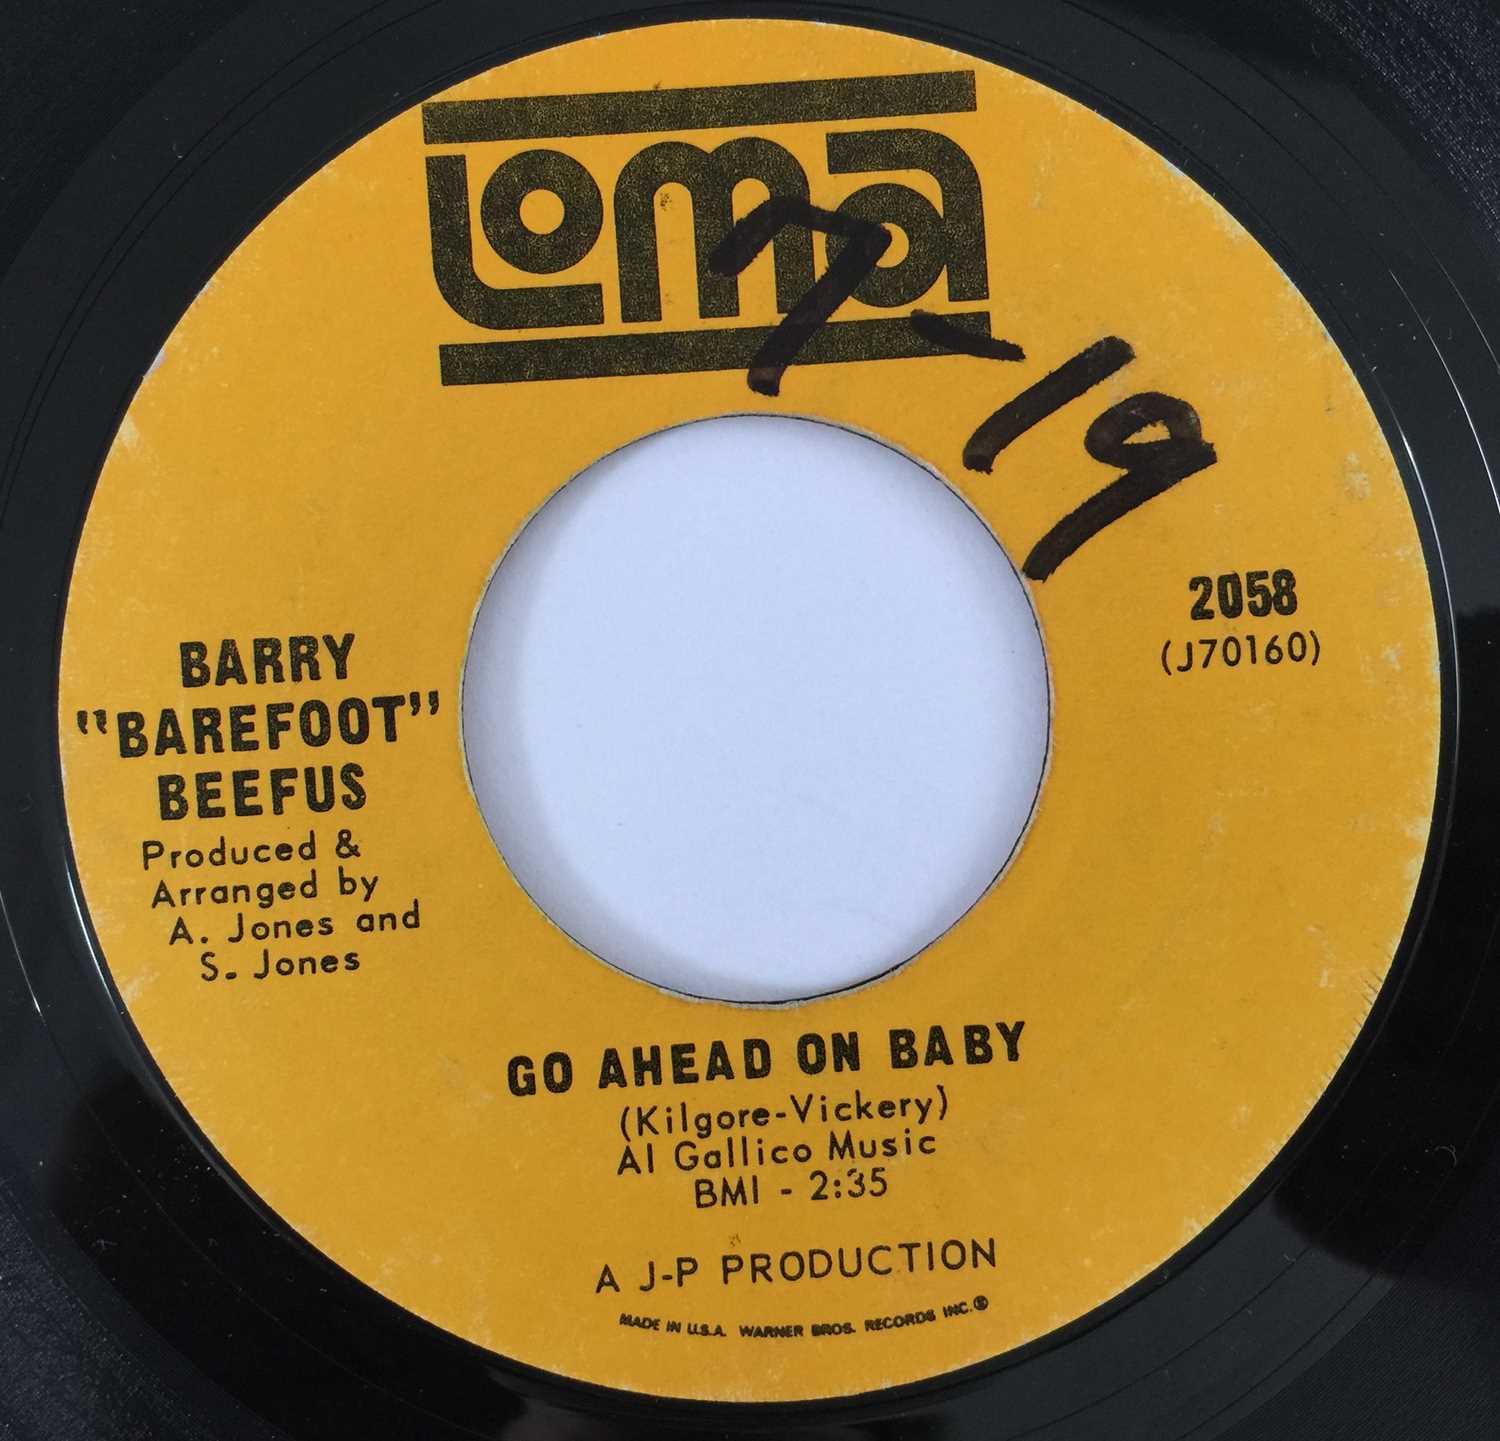 Lot 5 - BARRY "BAREFOOT" BEEFUS - GO AHEAD ON BABY/ "BAREFOOT" BEEFUS 7" (US LOMA 2058)